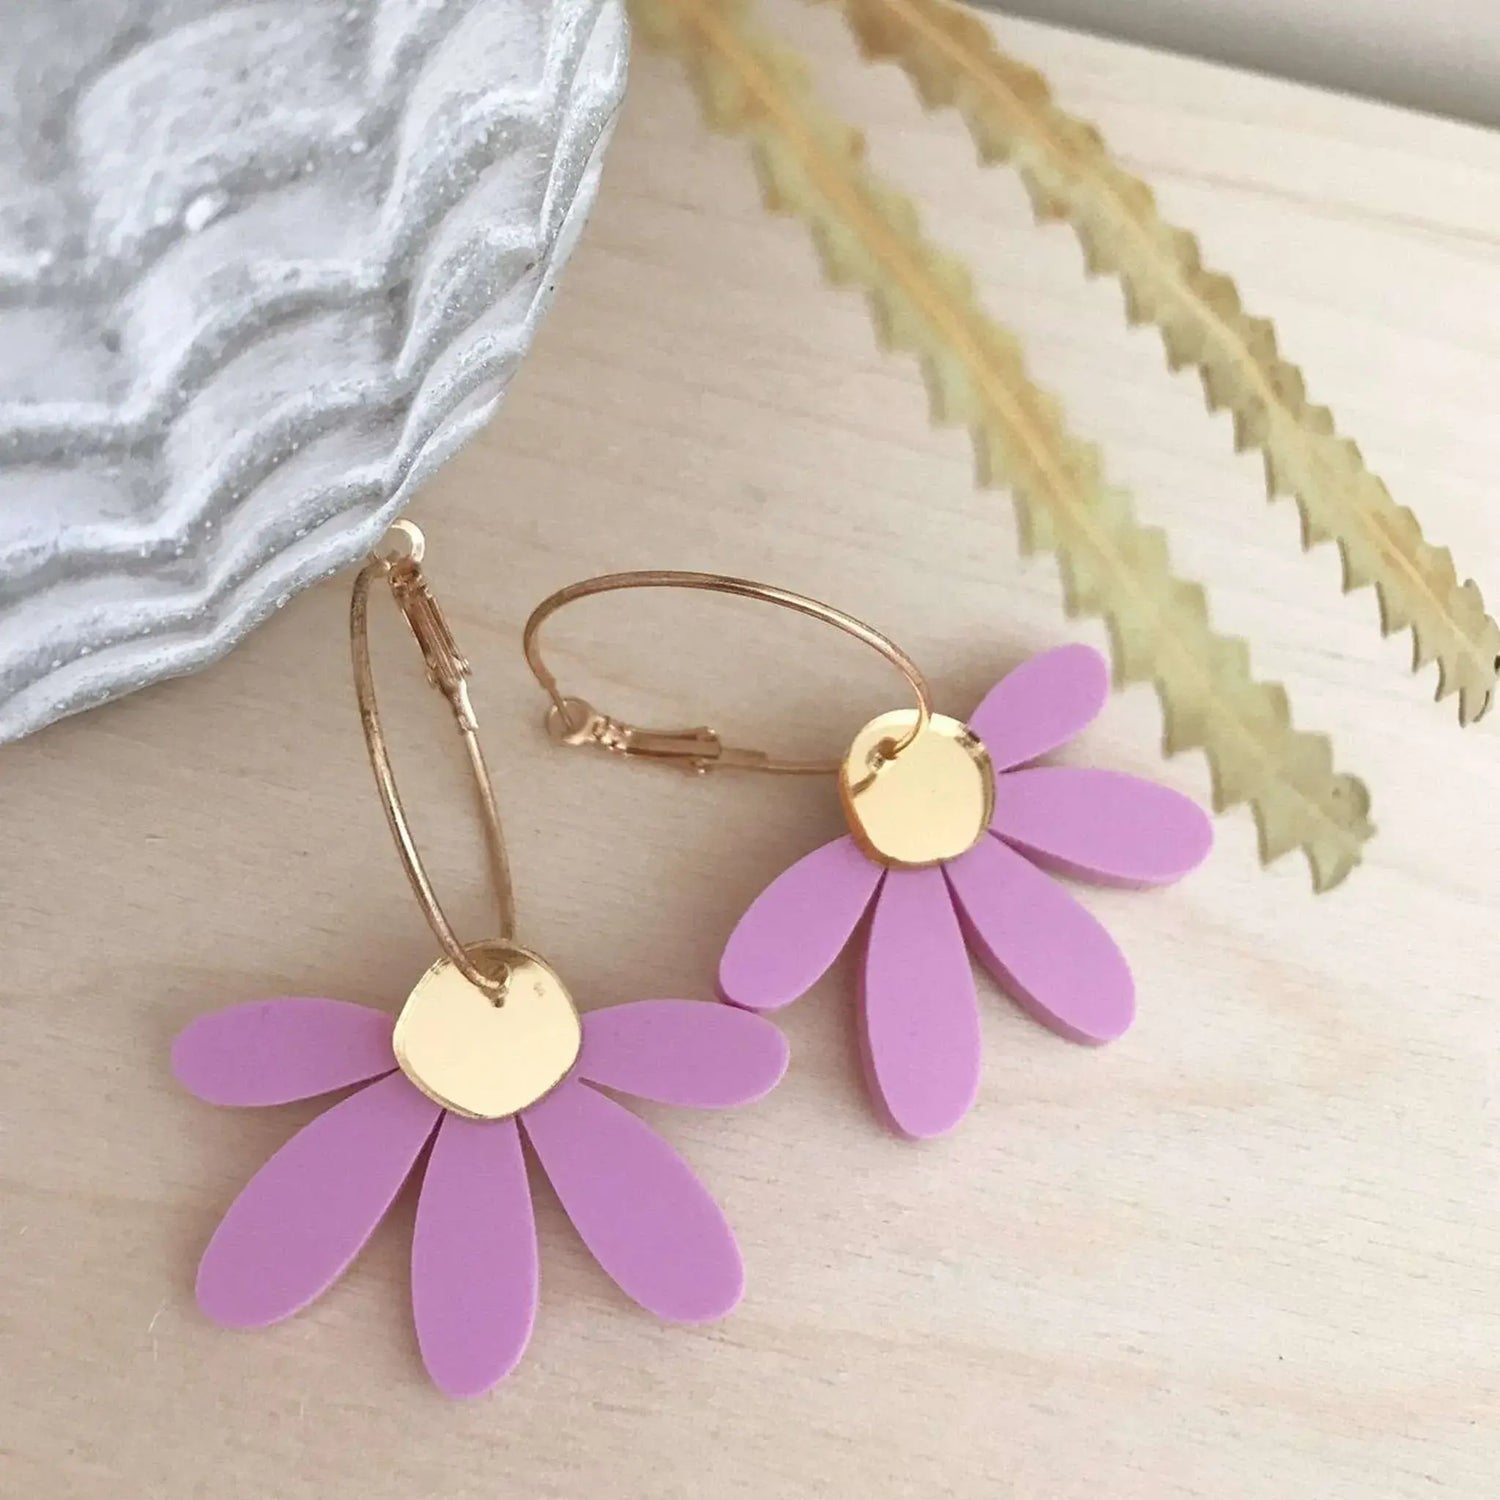 Jumbo Daisy Hoop Earrings in Lilac &amp; Gold by Foxie Collective